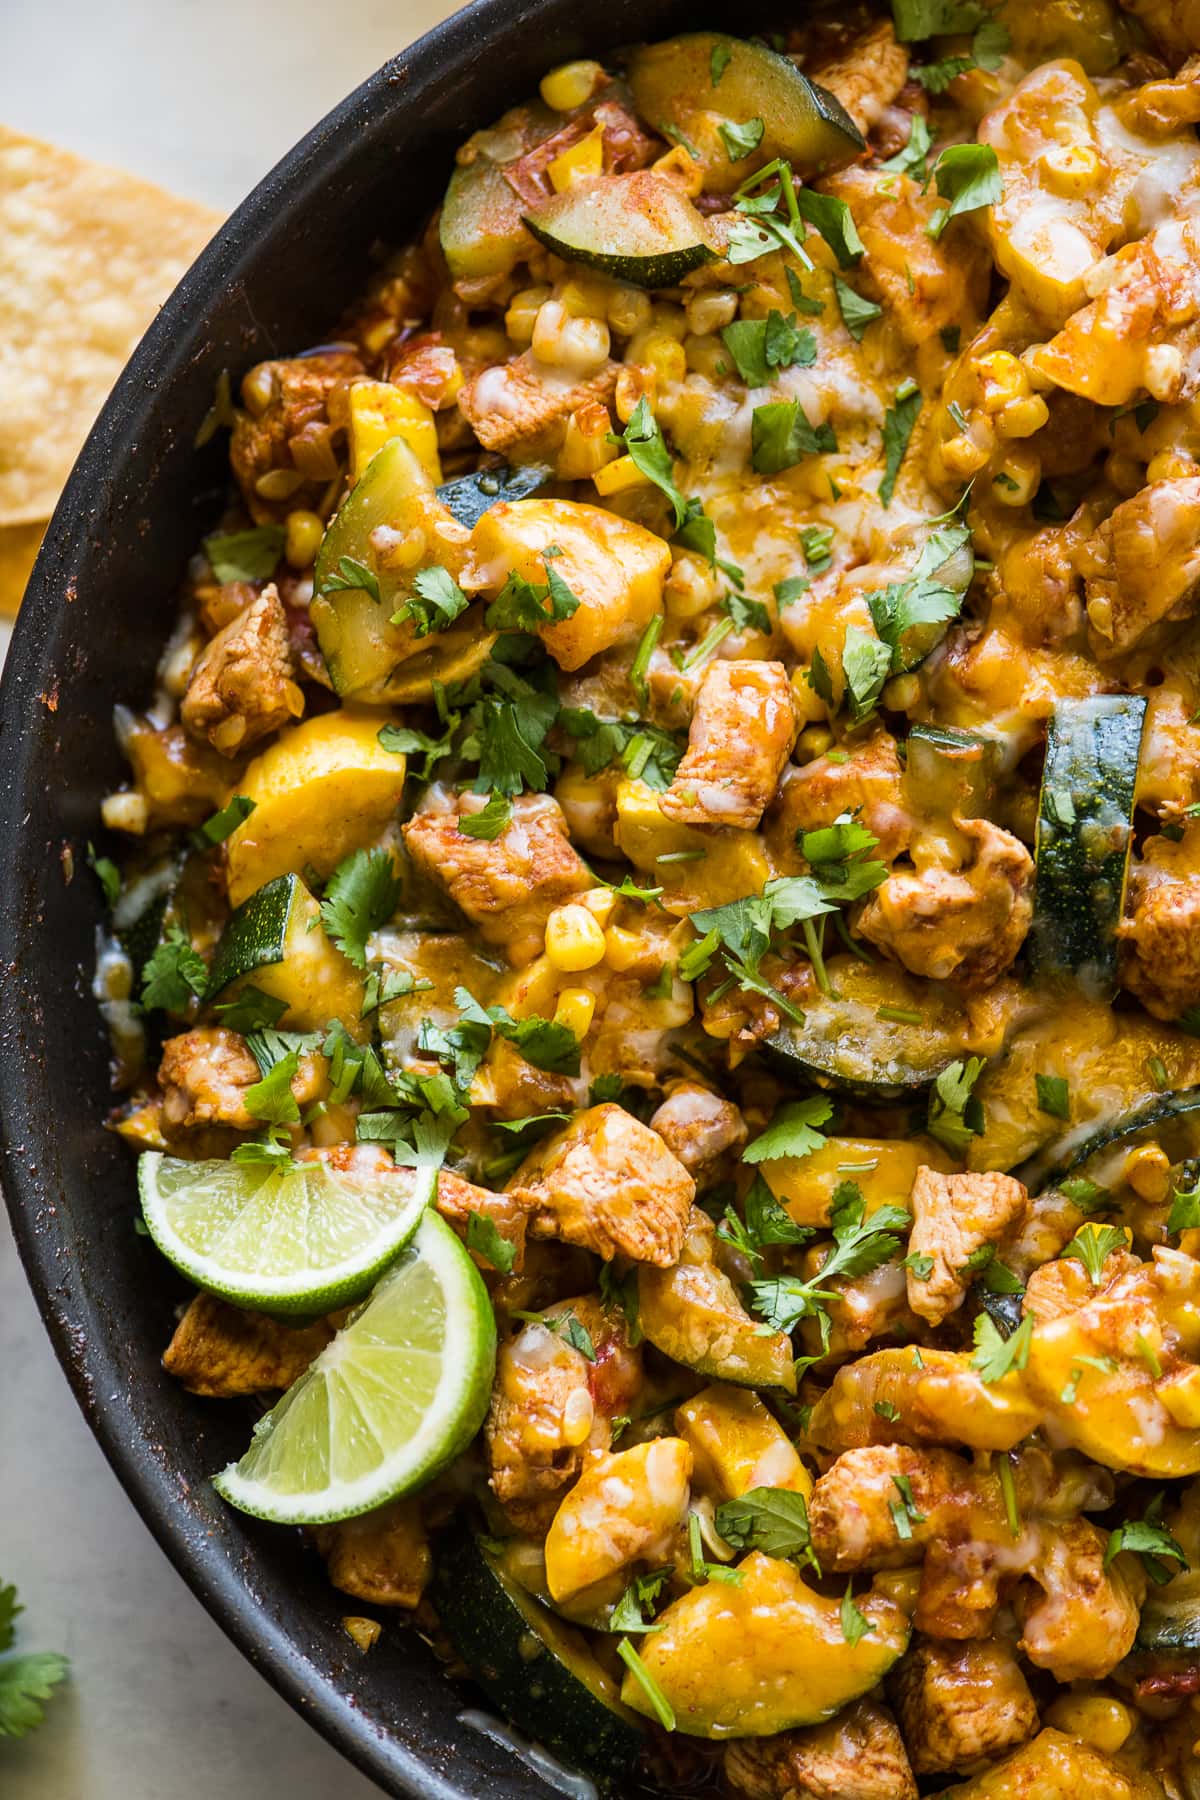 A southwest chicken and squash skillet topped with cheese and cilantro.